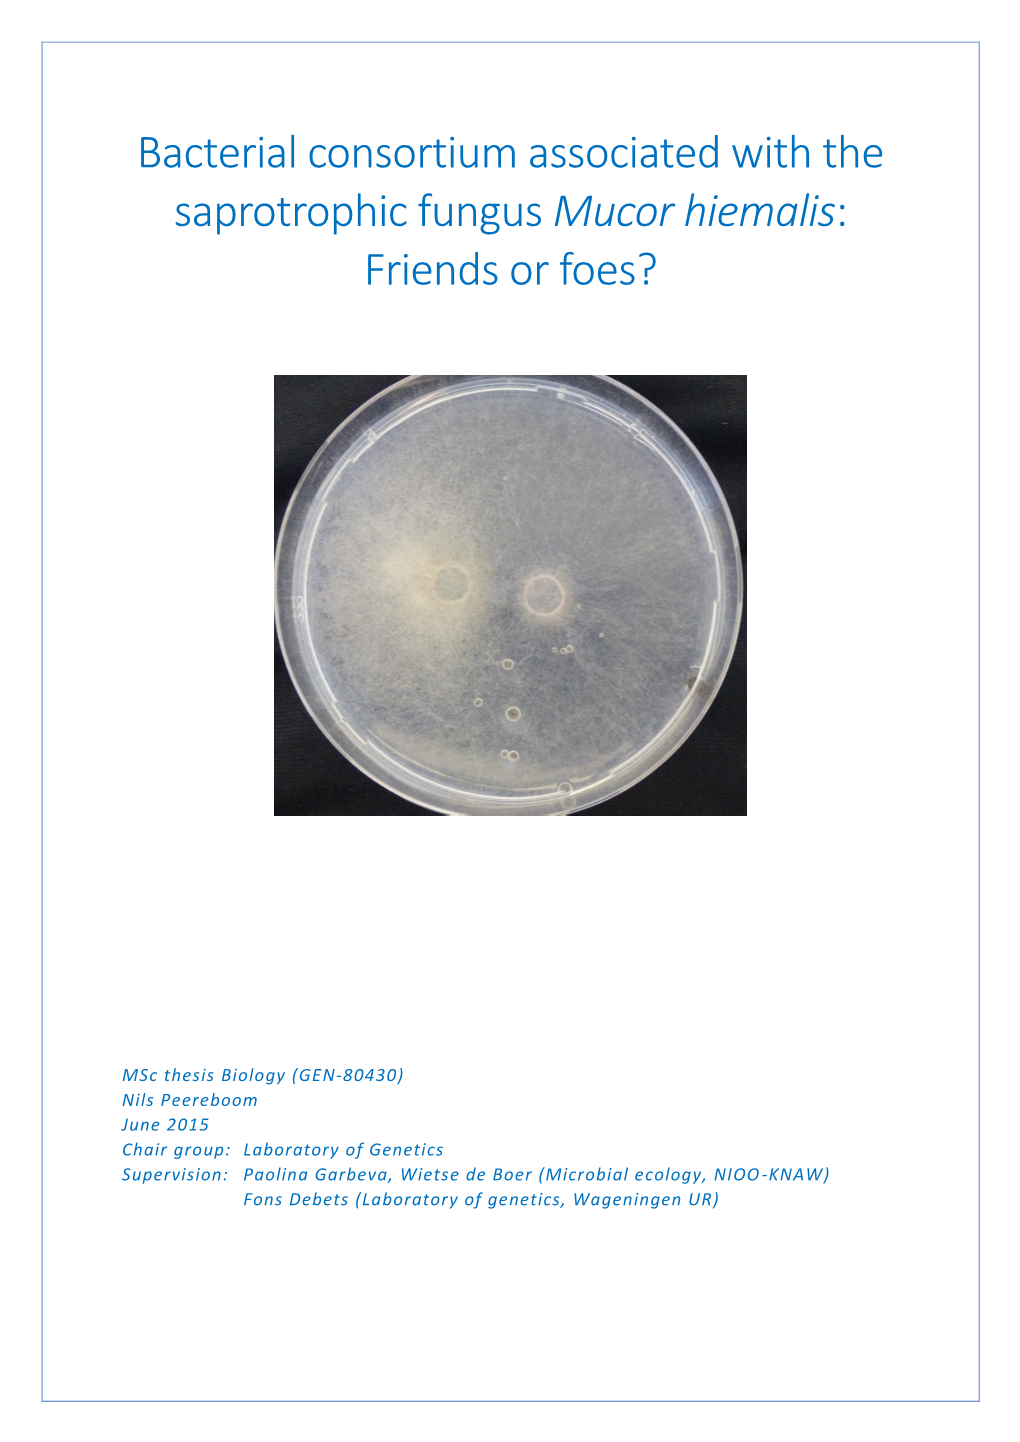 Bacterial Consortium Associated with the Saprotrophic Fungus Mucor Hiemalis: Friends Or Foes?